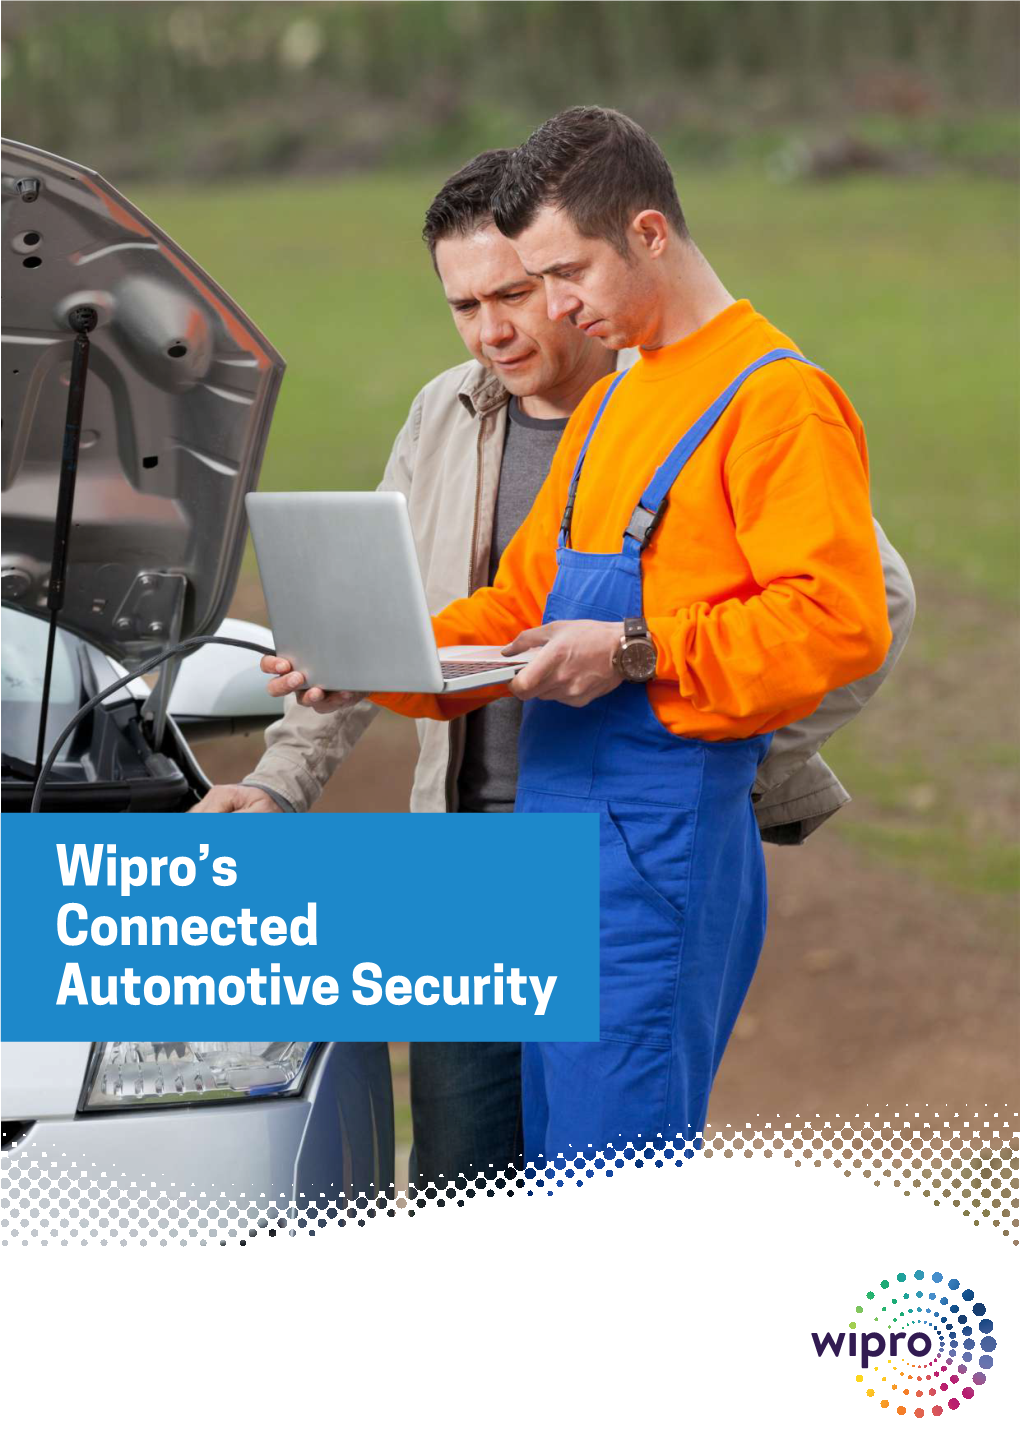 Wipro's Connected Automotive Security